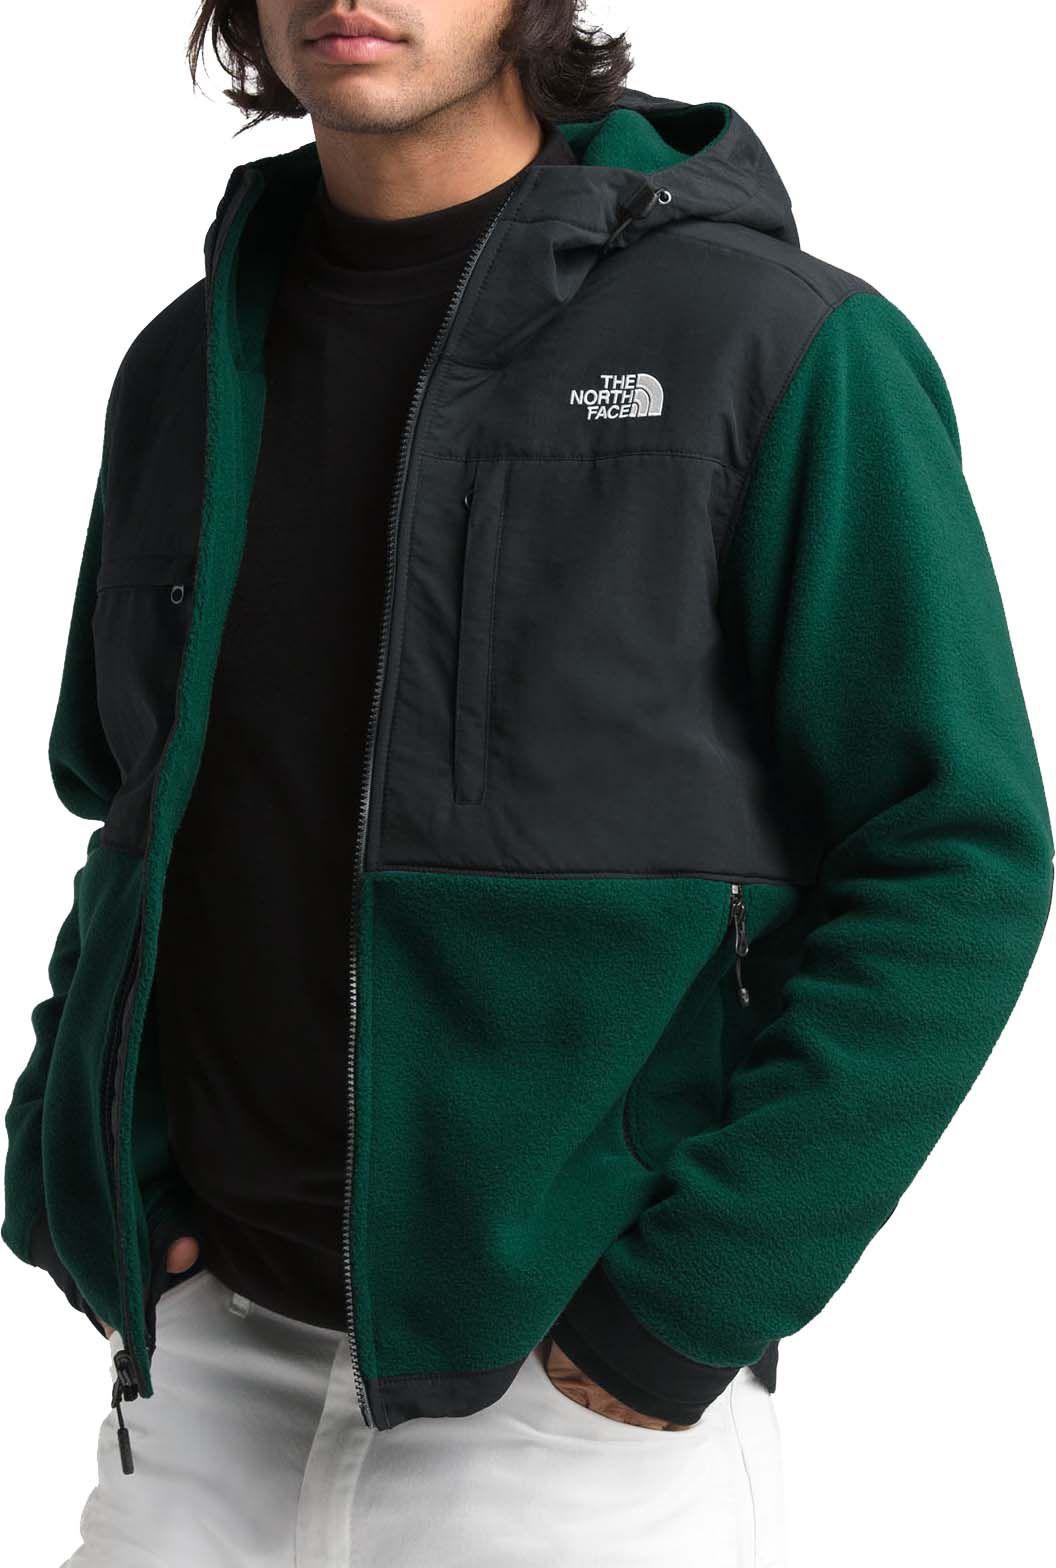 The North Face Denali 2 Fleece Hoodie in Night Green (Green) for Men - Lyst